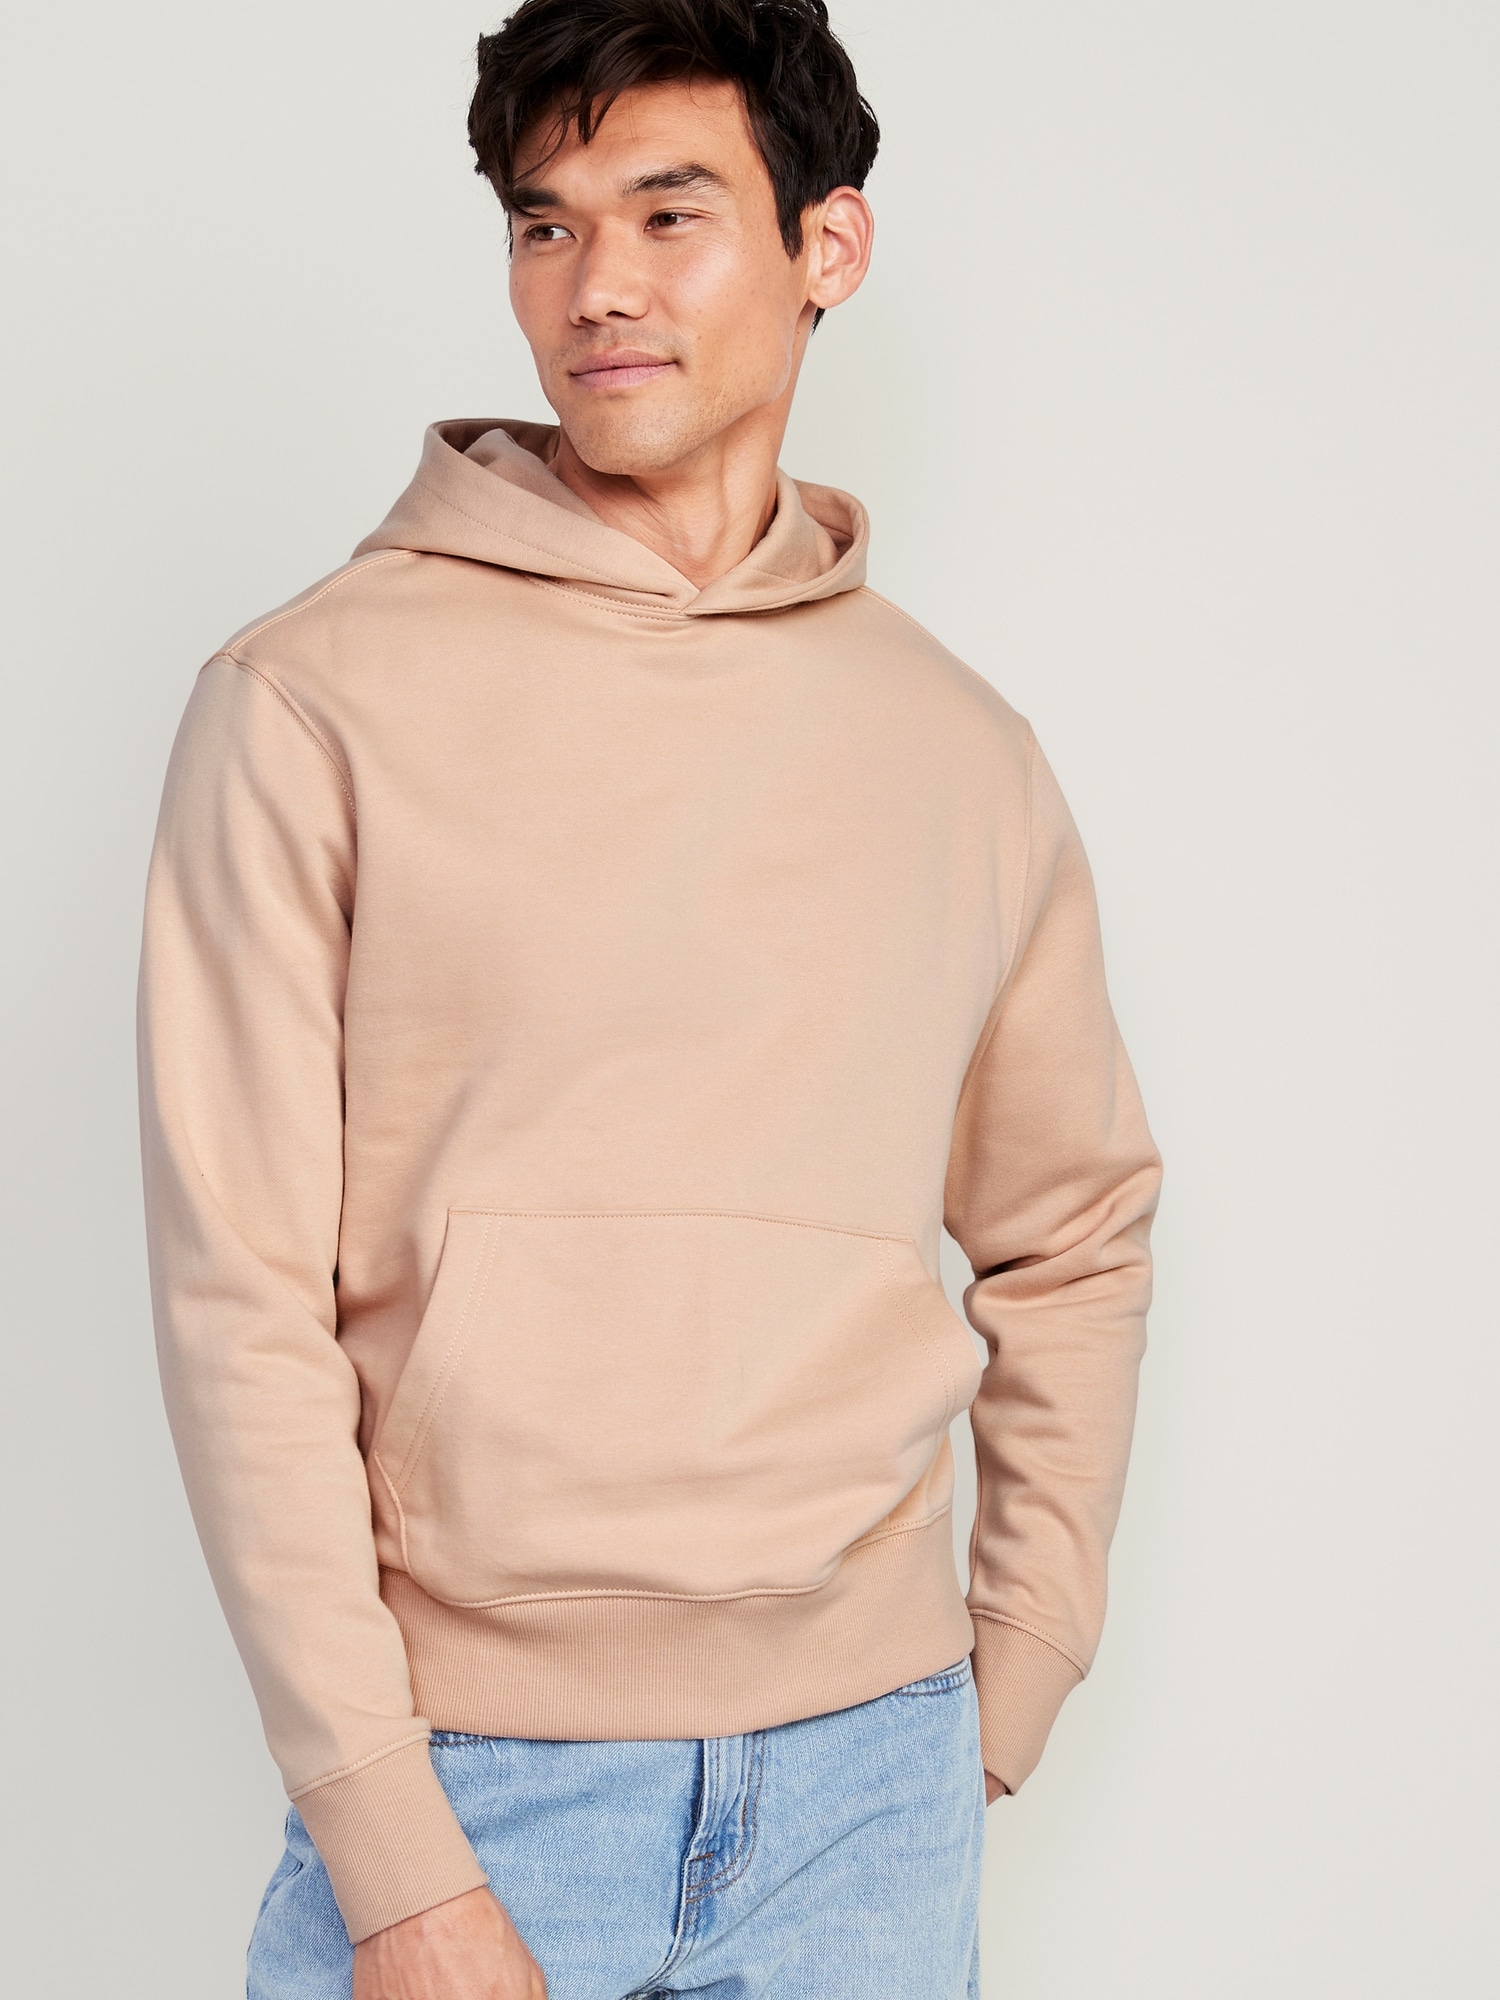 Old Navy Pullover Hoodie for Men . 1